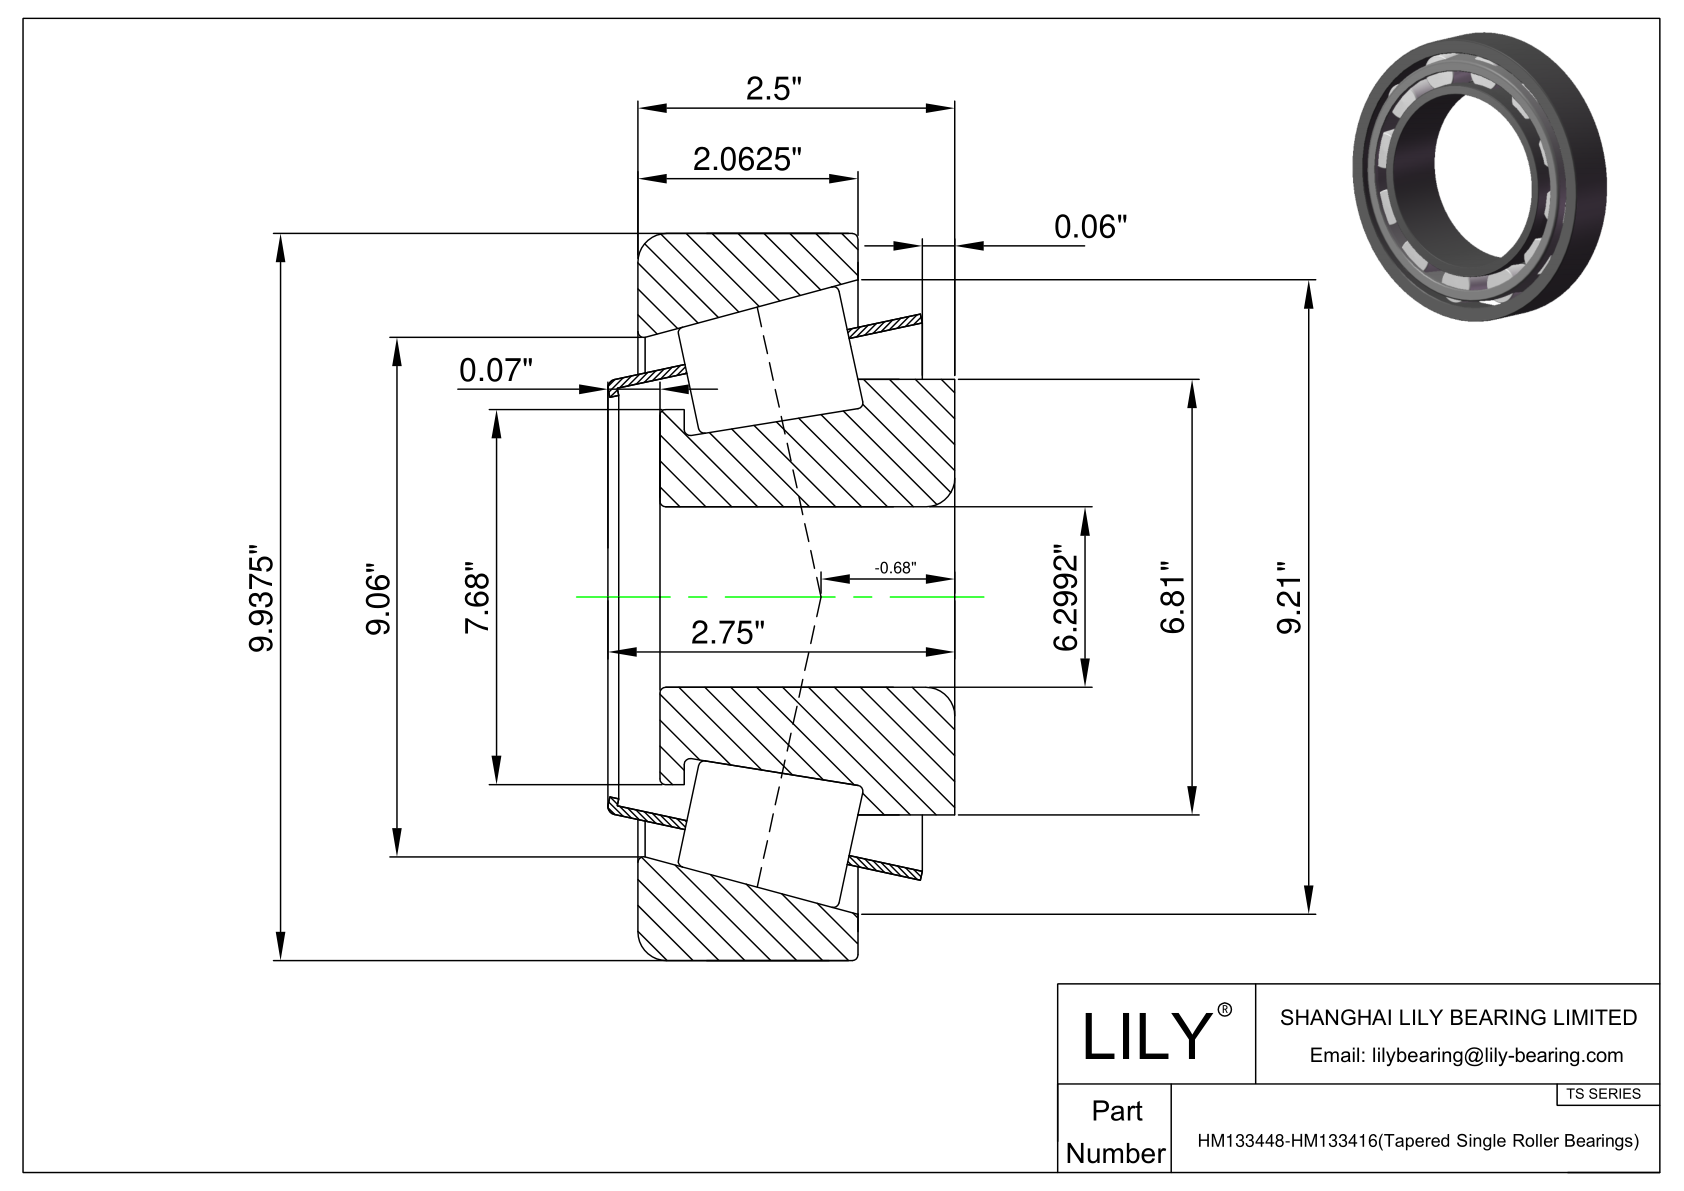 HM133448-HM133416 TS (Tapered Single Roller Bearings) (Imperial) cad drawing